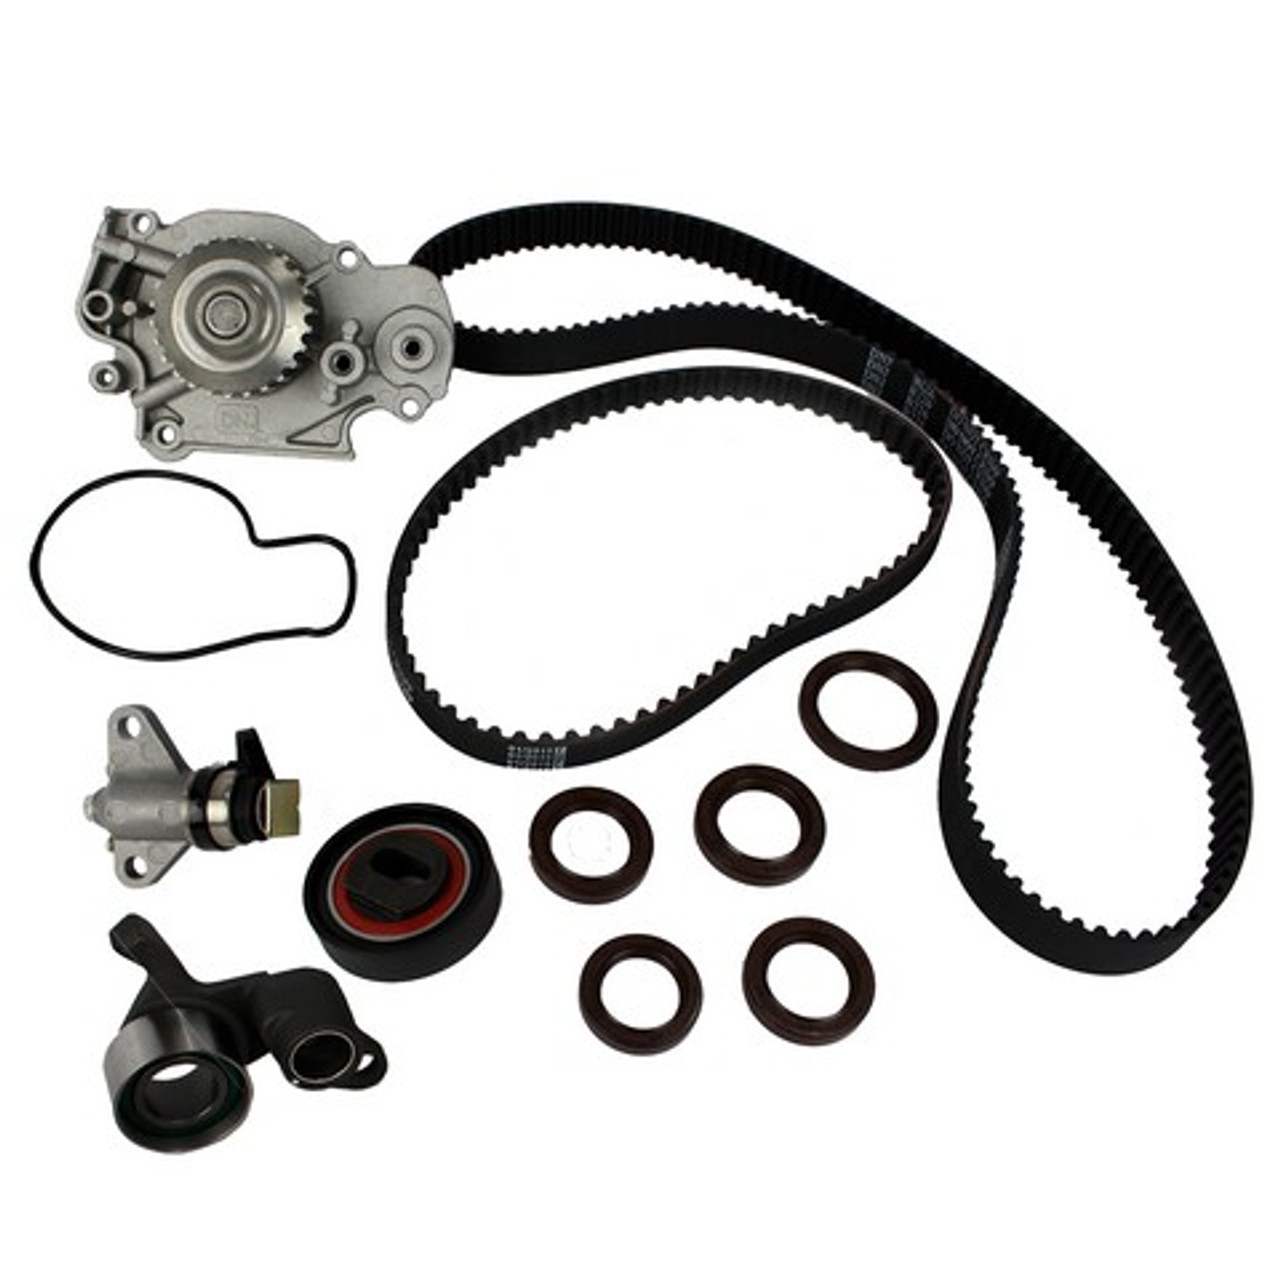 1997 Honda Prelude 2.2L Timing Belt Kit with Water Pump TBK223WP.E5